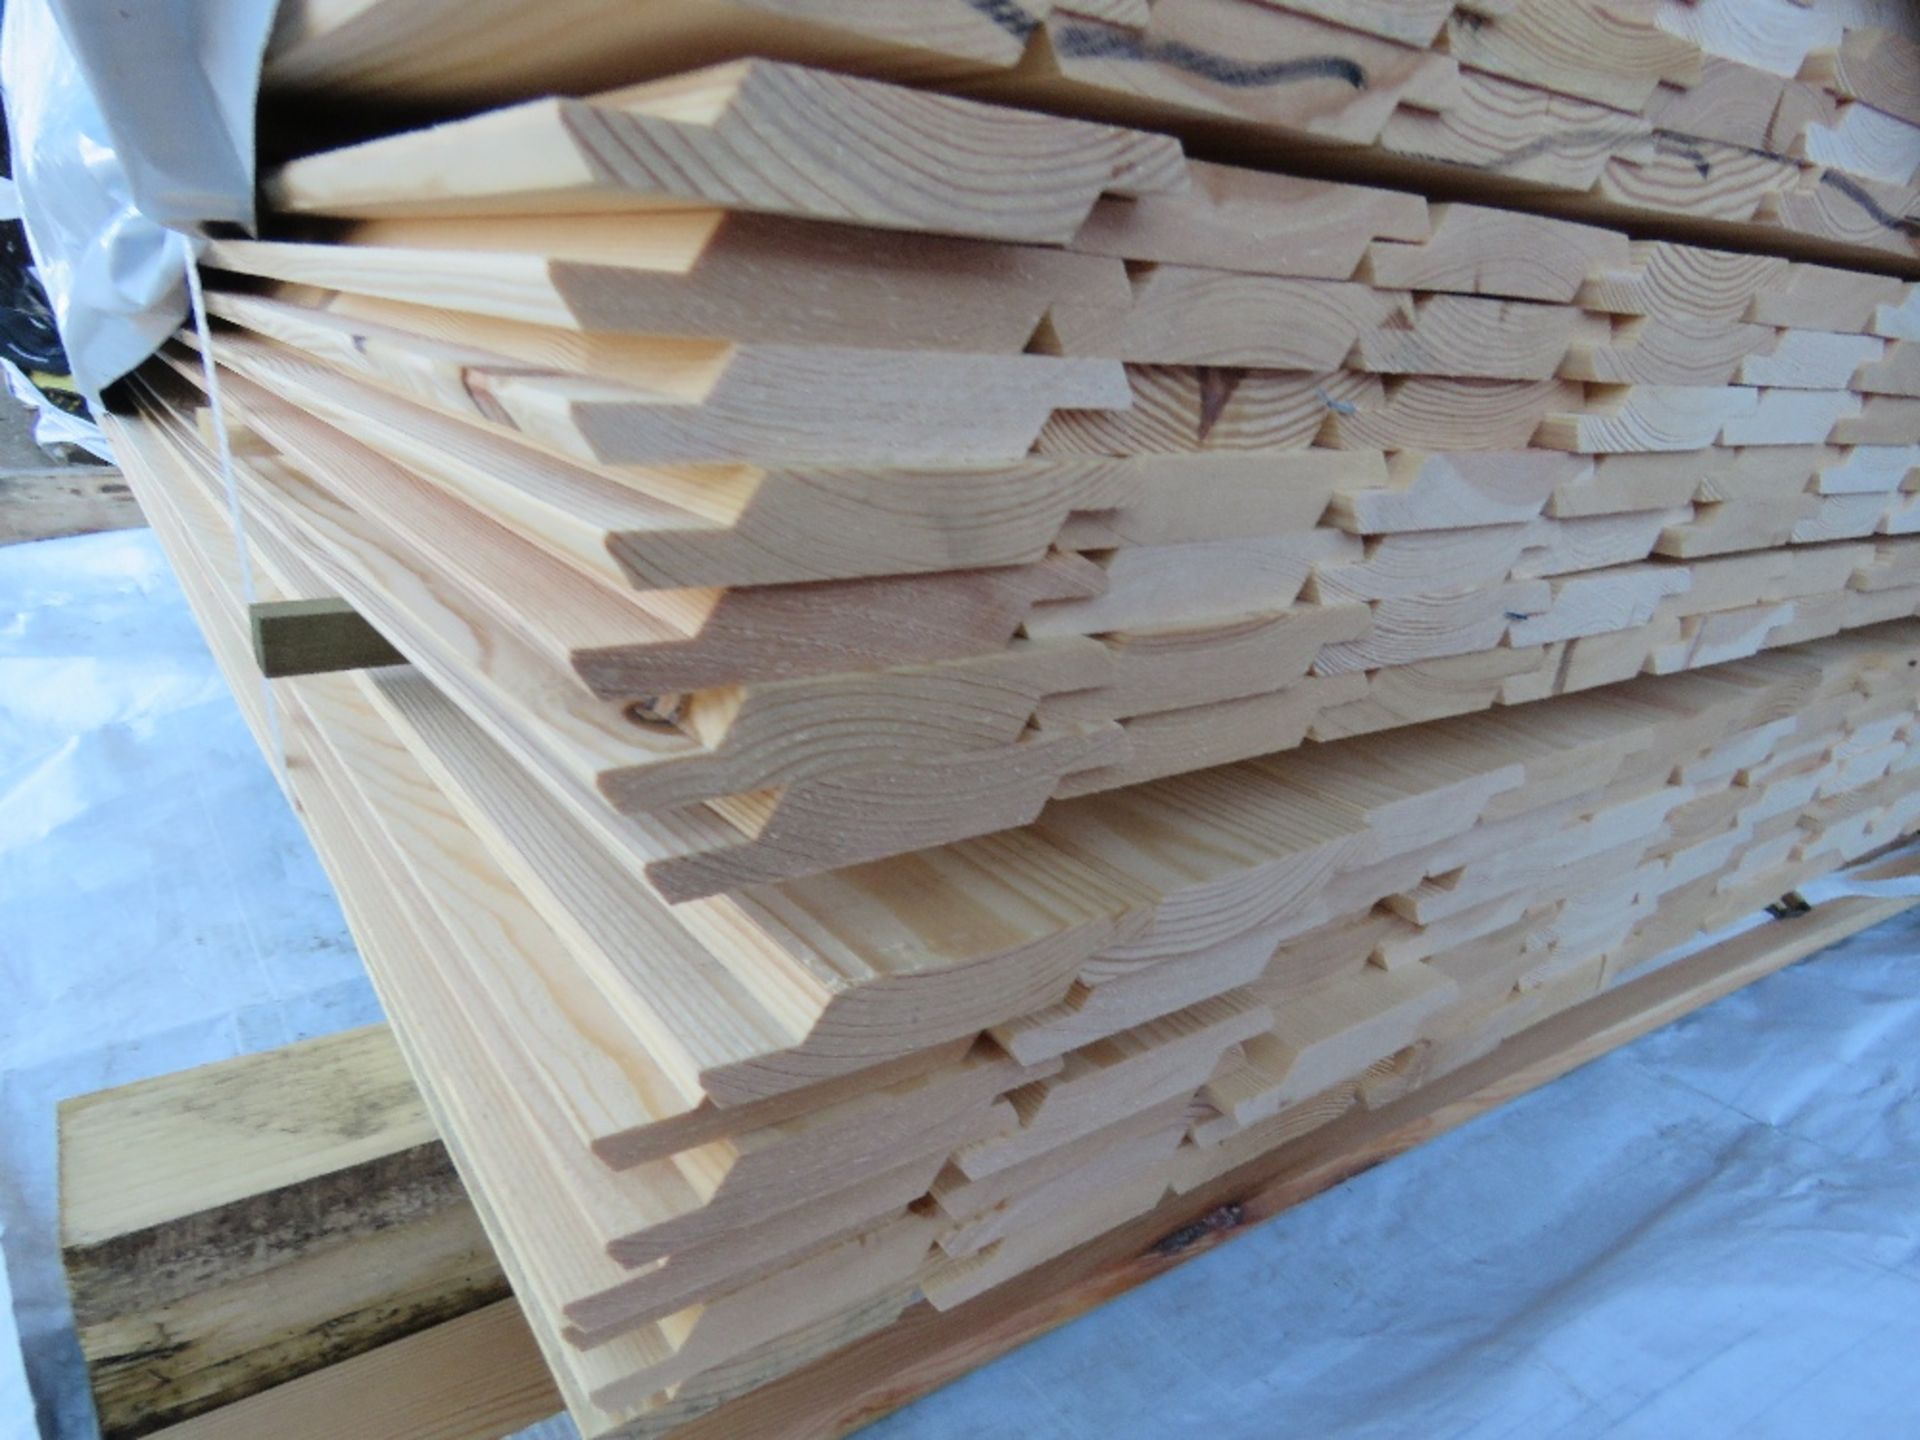 STACK OF 4NO BUNDLES OF UNTREATED SHIPLAP TIMBER FENCE CLADDING BOARDS. SIZE: 1.4-1.83M LENGTH X - Image 4 of 6